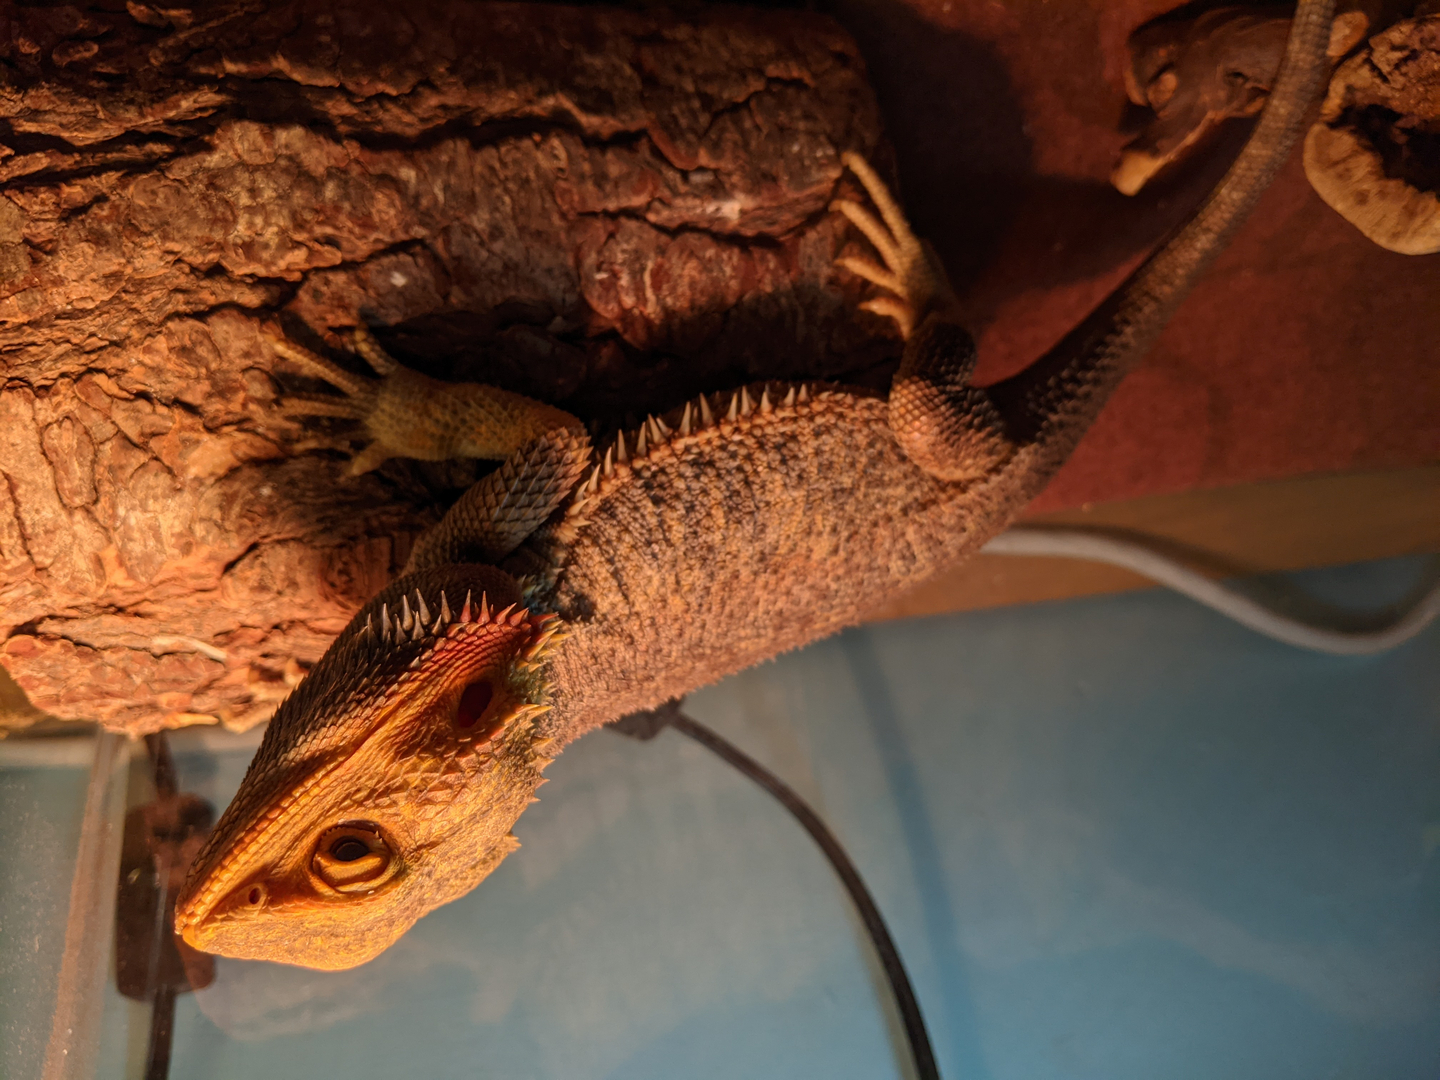 Meet the bearded dragons of a Pine Island rescue